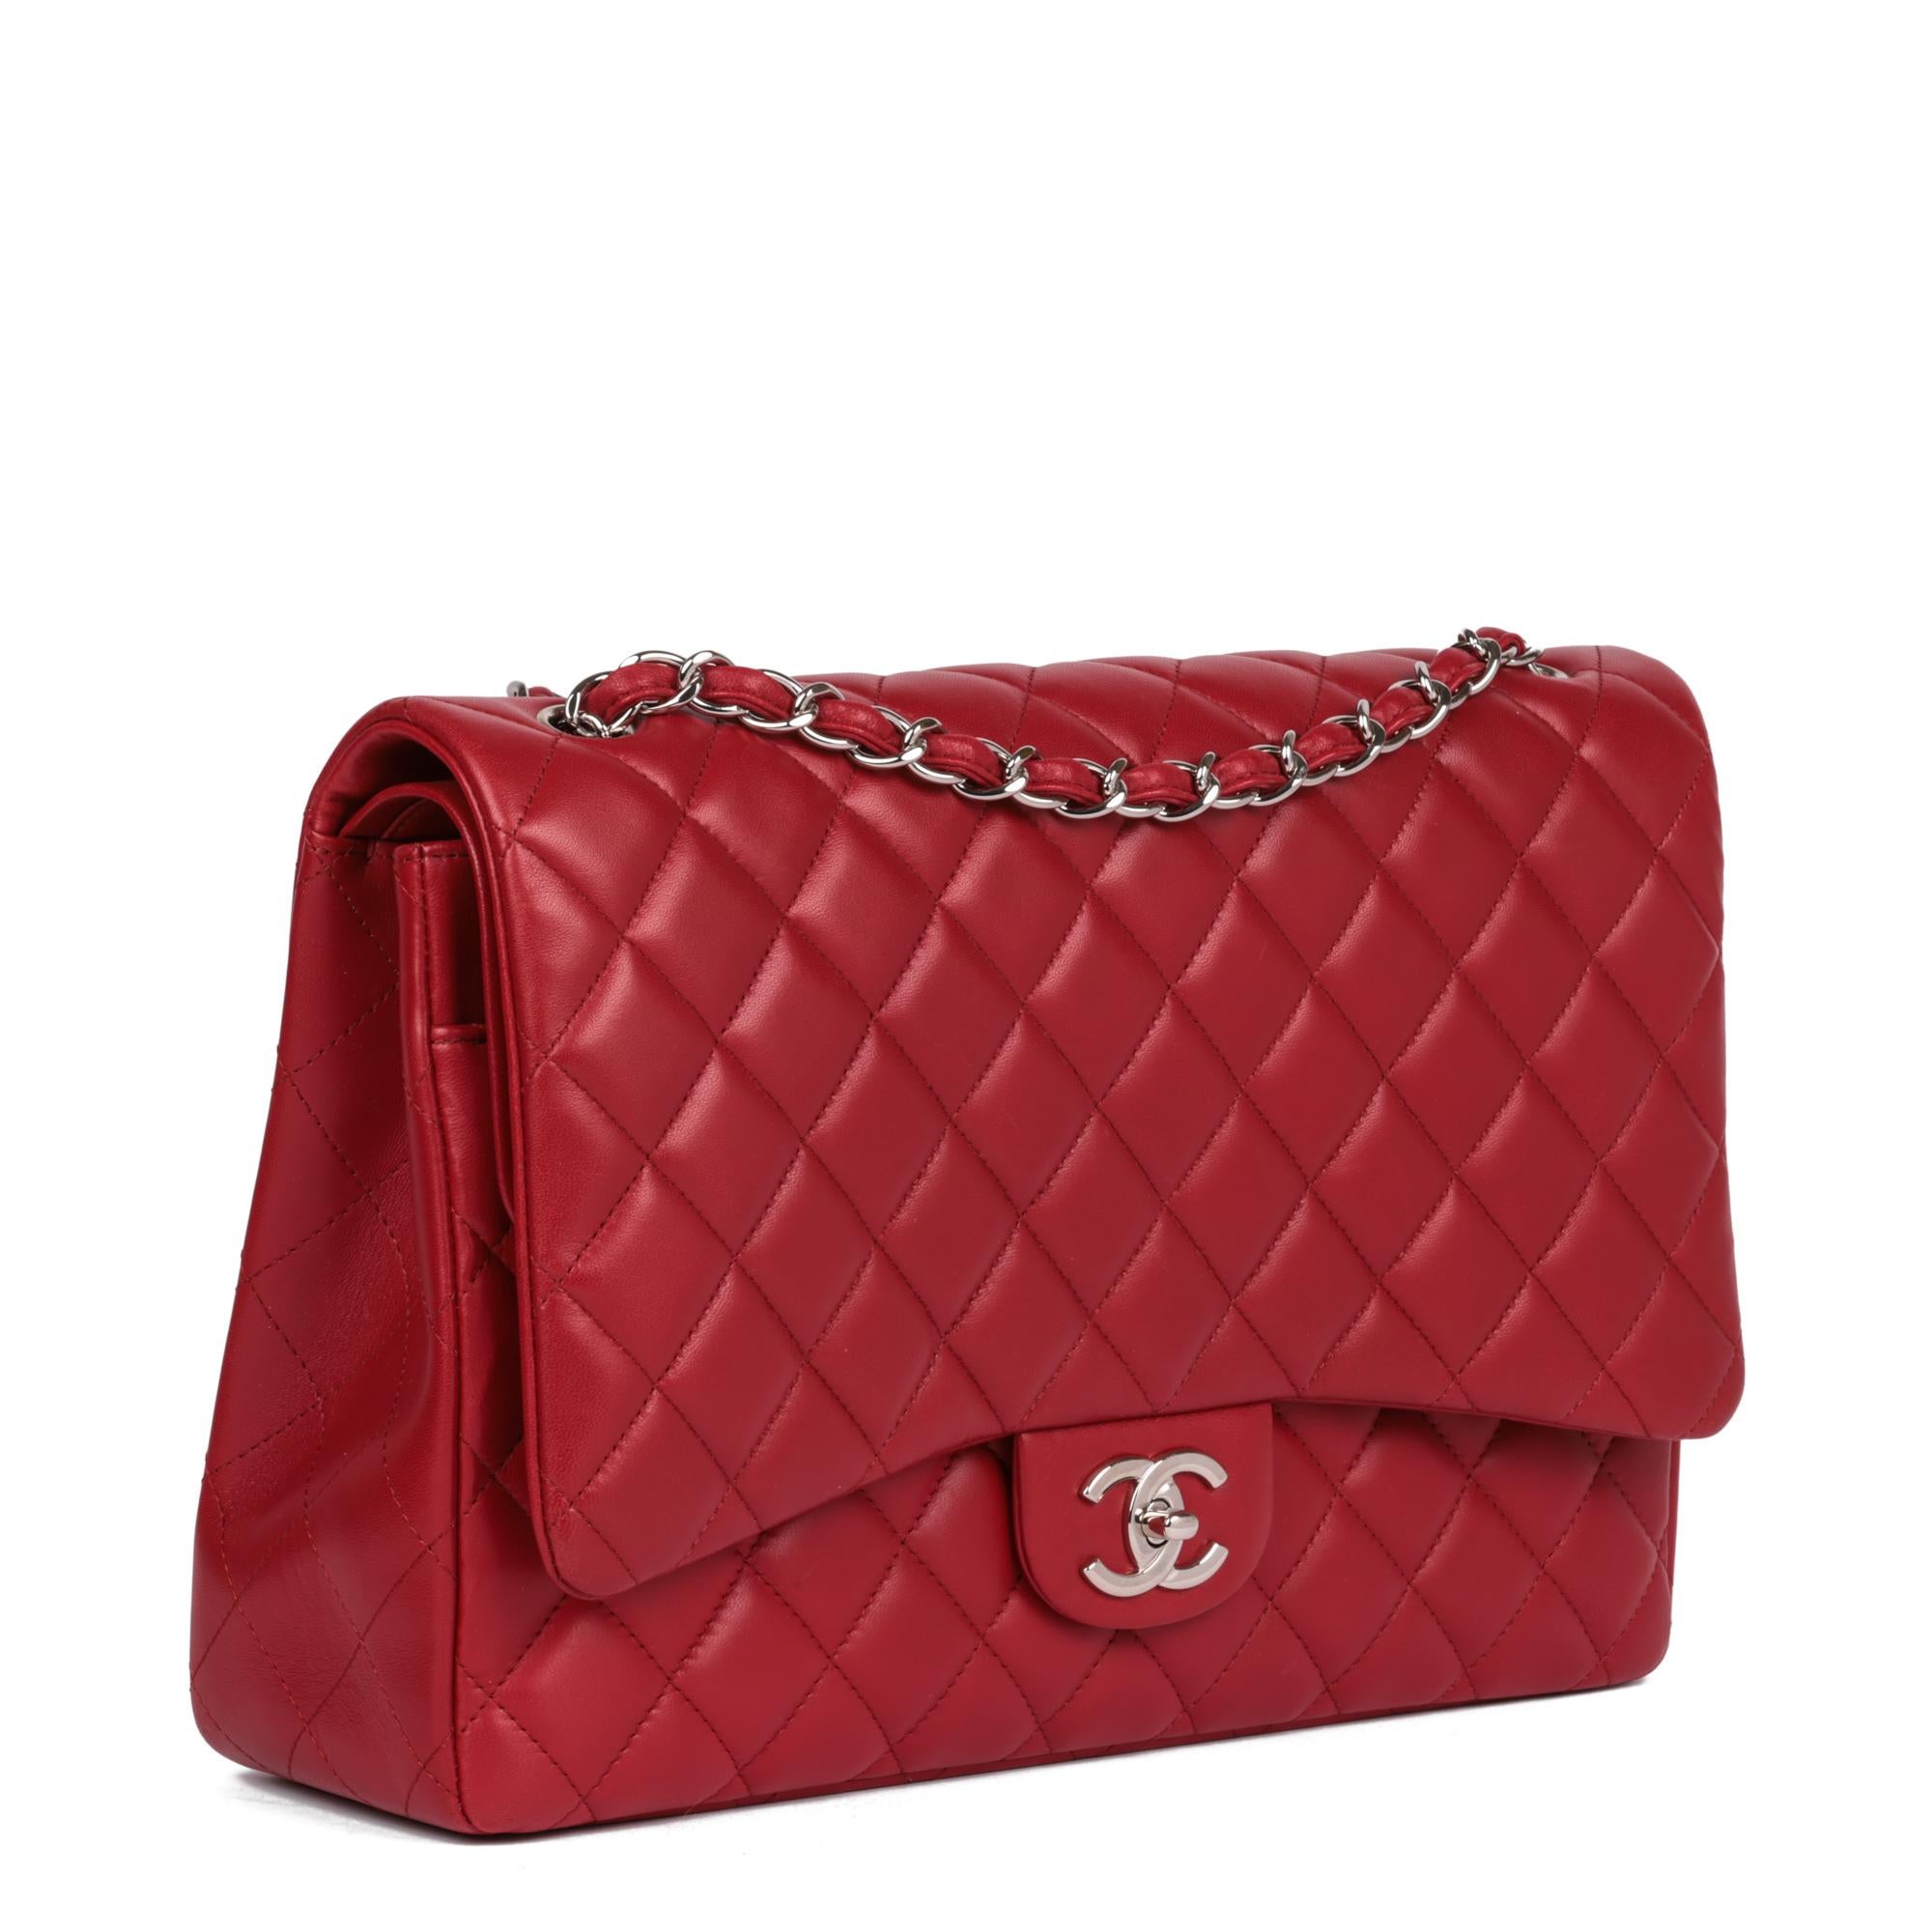 CHANEL
Red Quilted Lambskin Leather Maxi Classic Double Flap Bag

Xupes Reference: HB5163
Serial Number: 17249513
Age (Circa): 2012
Accompanied By: Chanel Dust Bag, Box, Authenticity Card, Chanel Receipt, Ribbon, Protective Felt
Authenticity